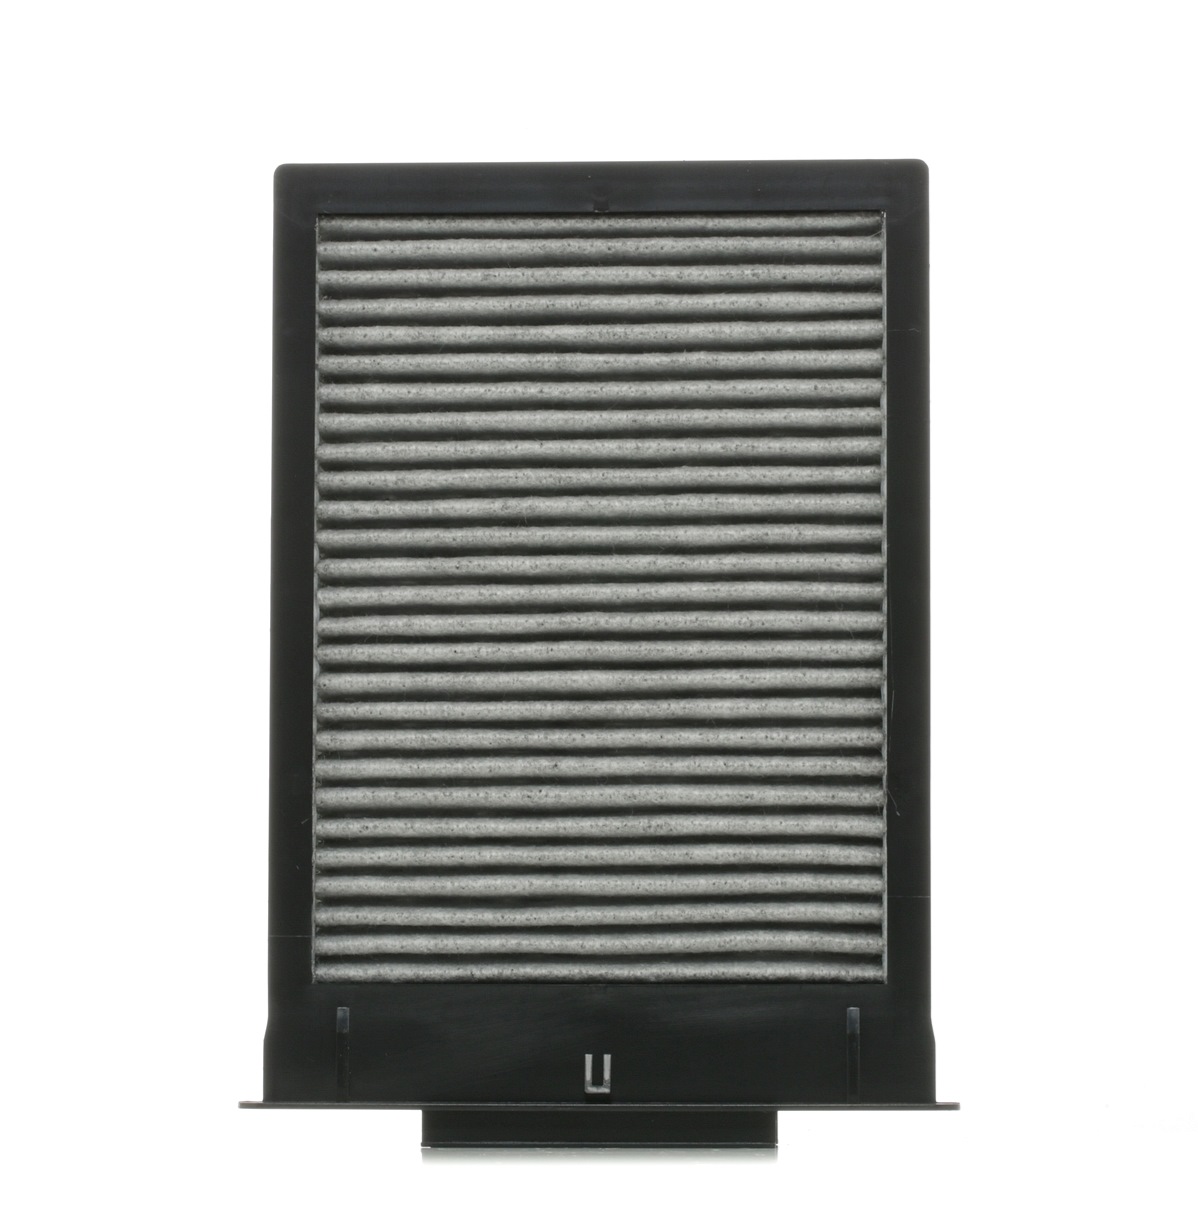 LAK 304 MAHLE ORIGINAL Pollen filter TOYOTA Activated Carbon Filter, 224,0 mm x 163 mm x 44,0 mm